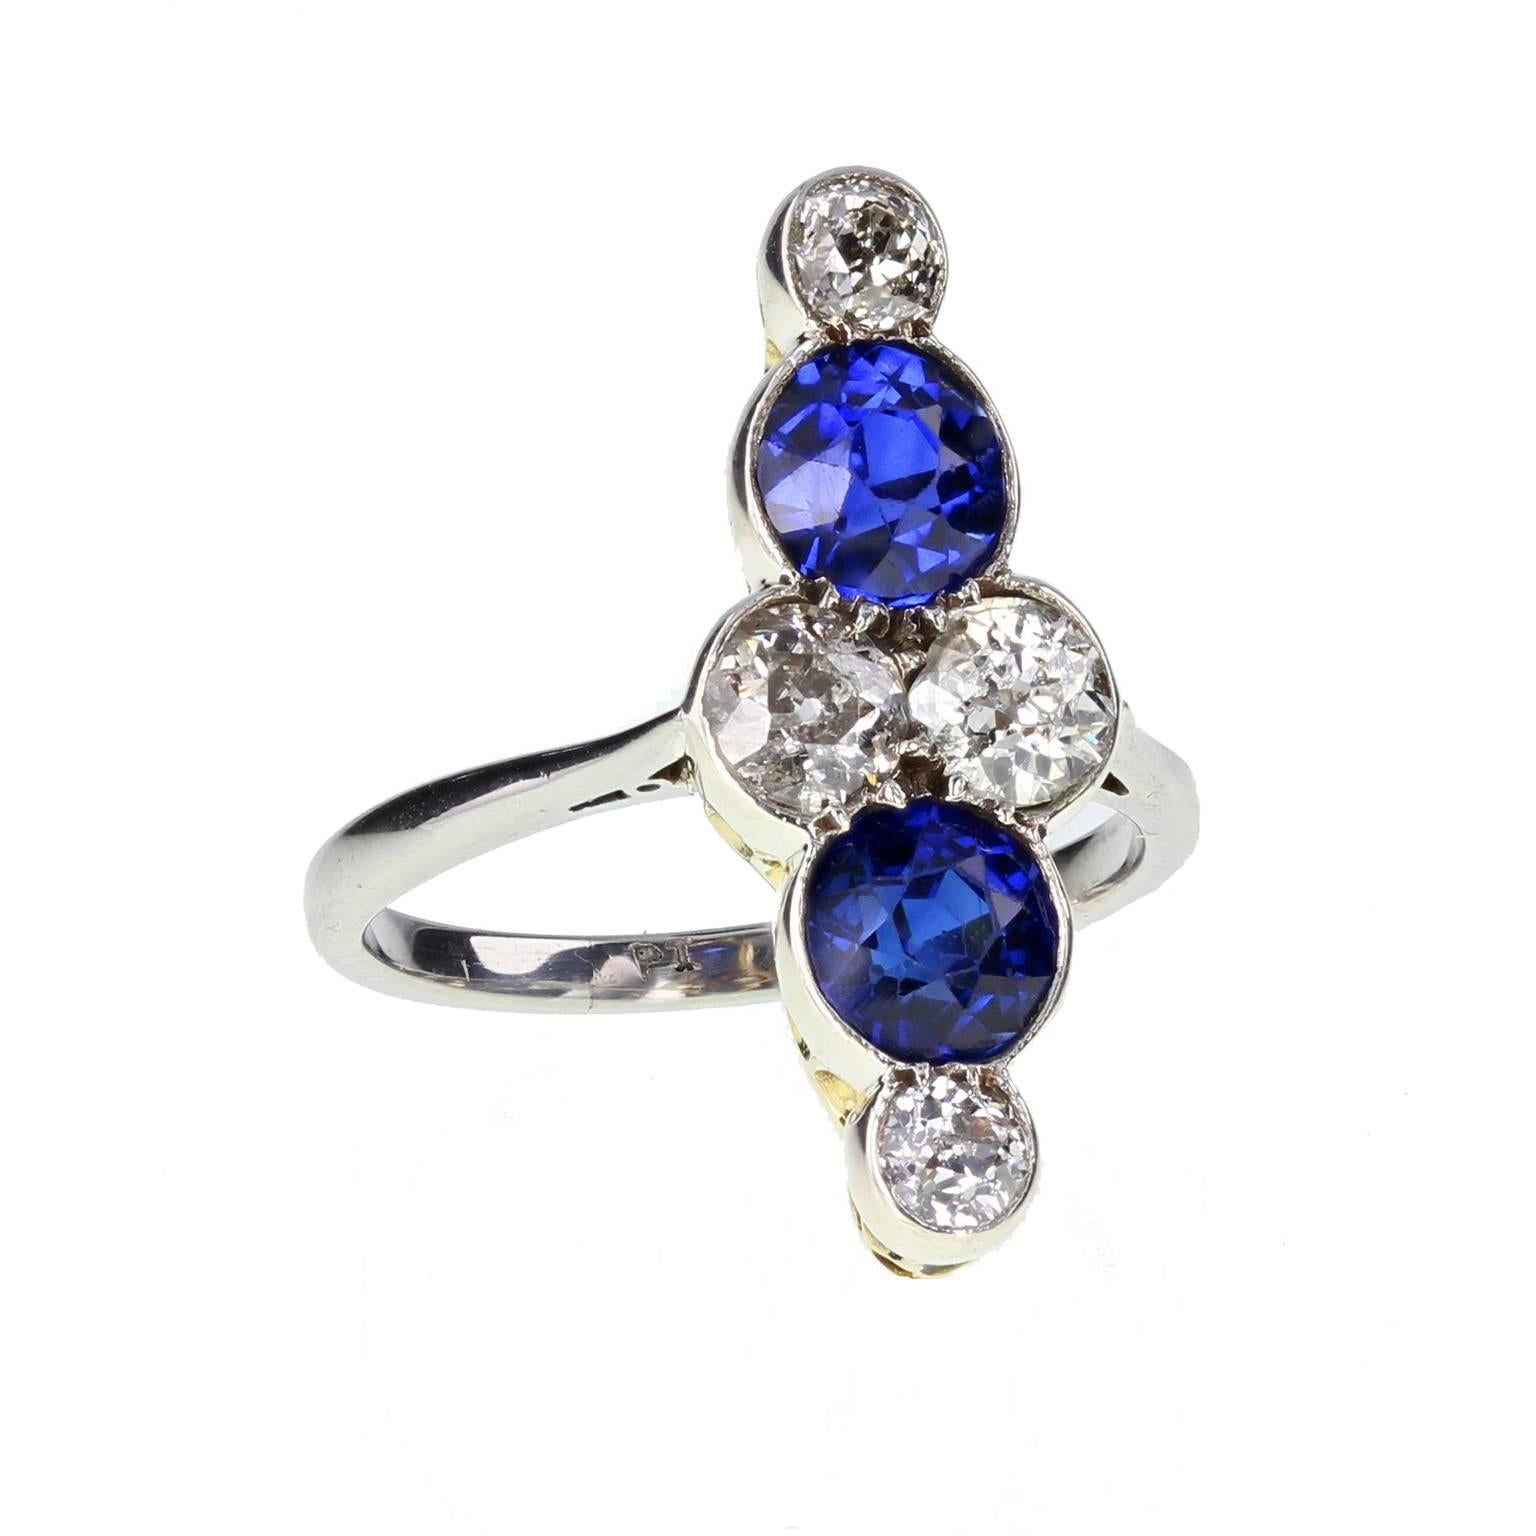 A typically styled 1920s sapphire and diamond ring featuring two old-cut sapphires and four old-cut diamonds set to form a lozenge shaped cluster. Platinum and gold setting with a platinum shank. Excellent condition and exceptionally value Art Deco